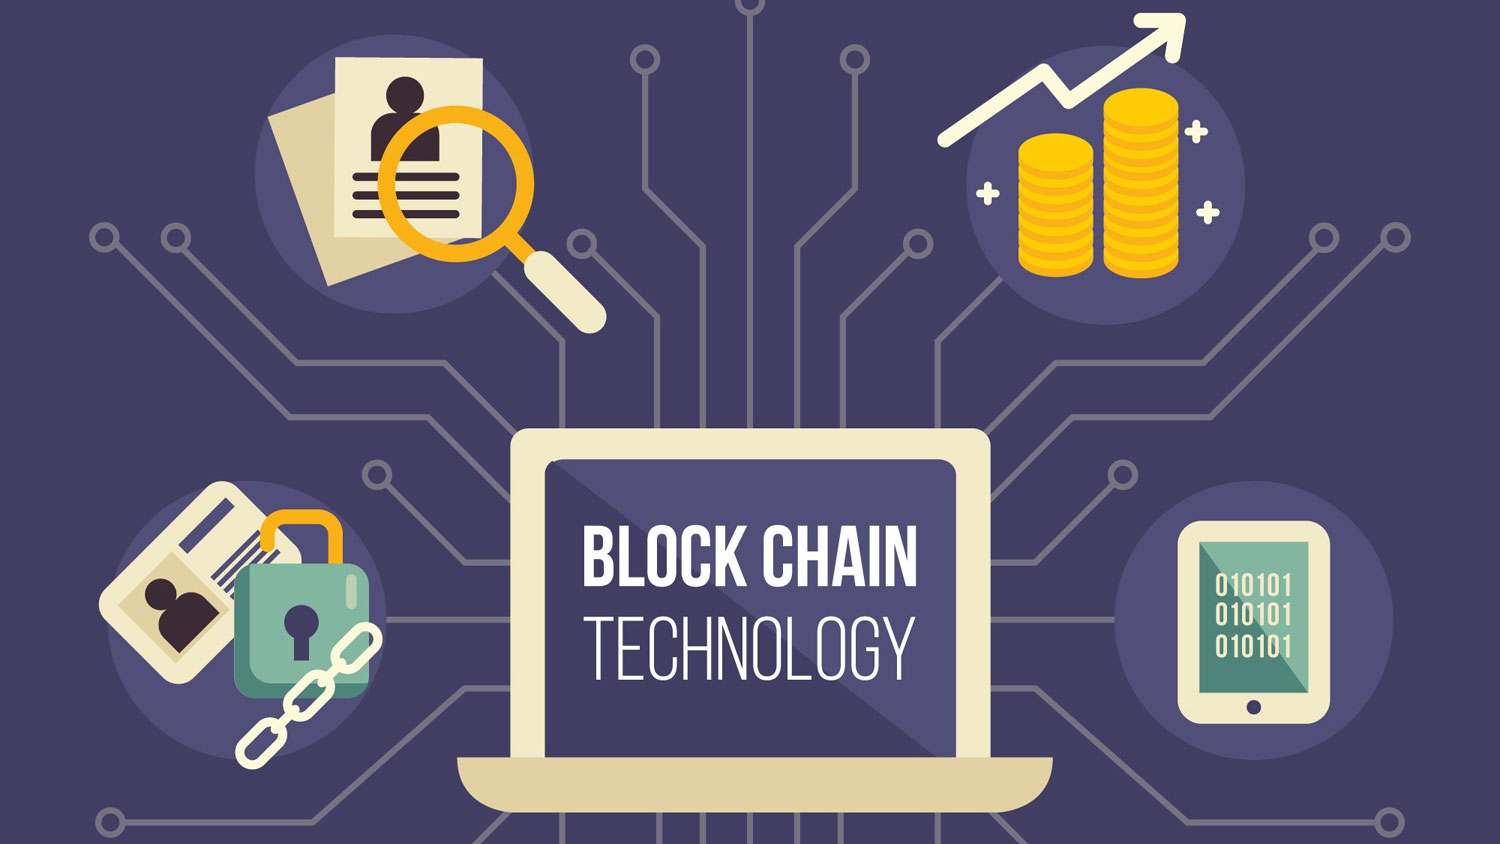 blockchain training by expert trainers - free resume building assistance